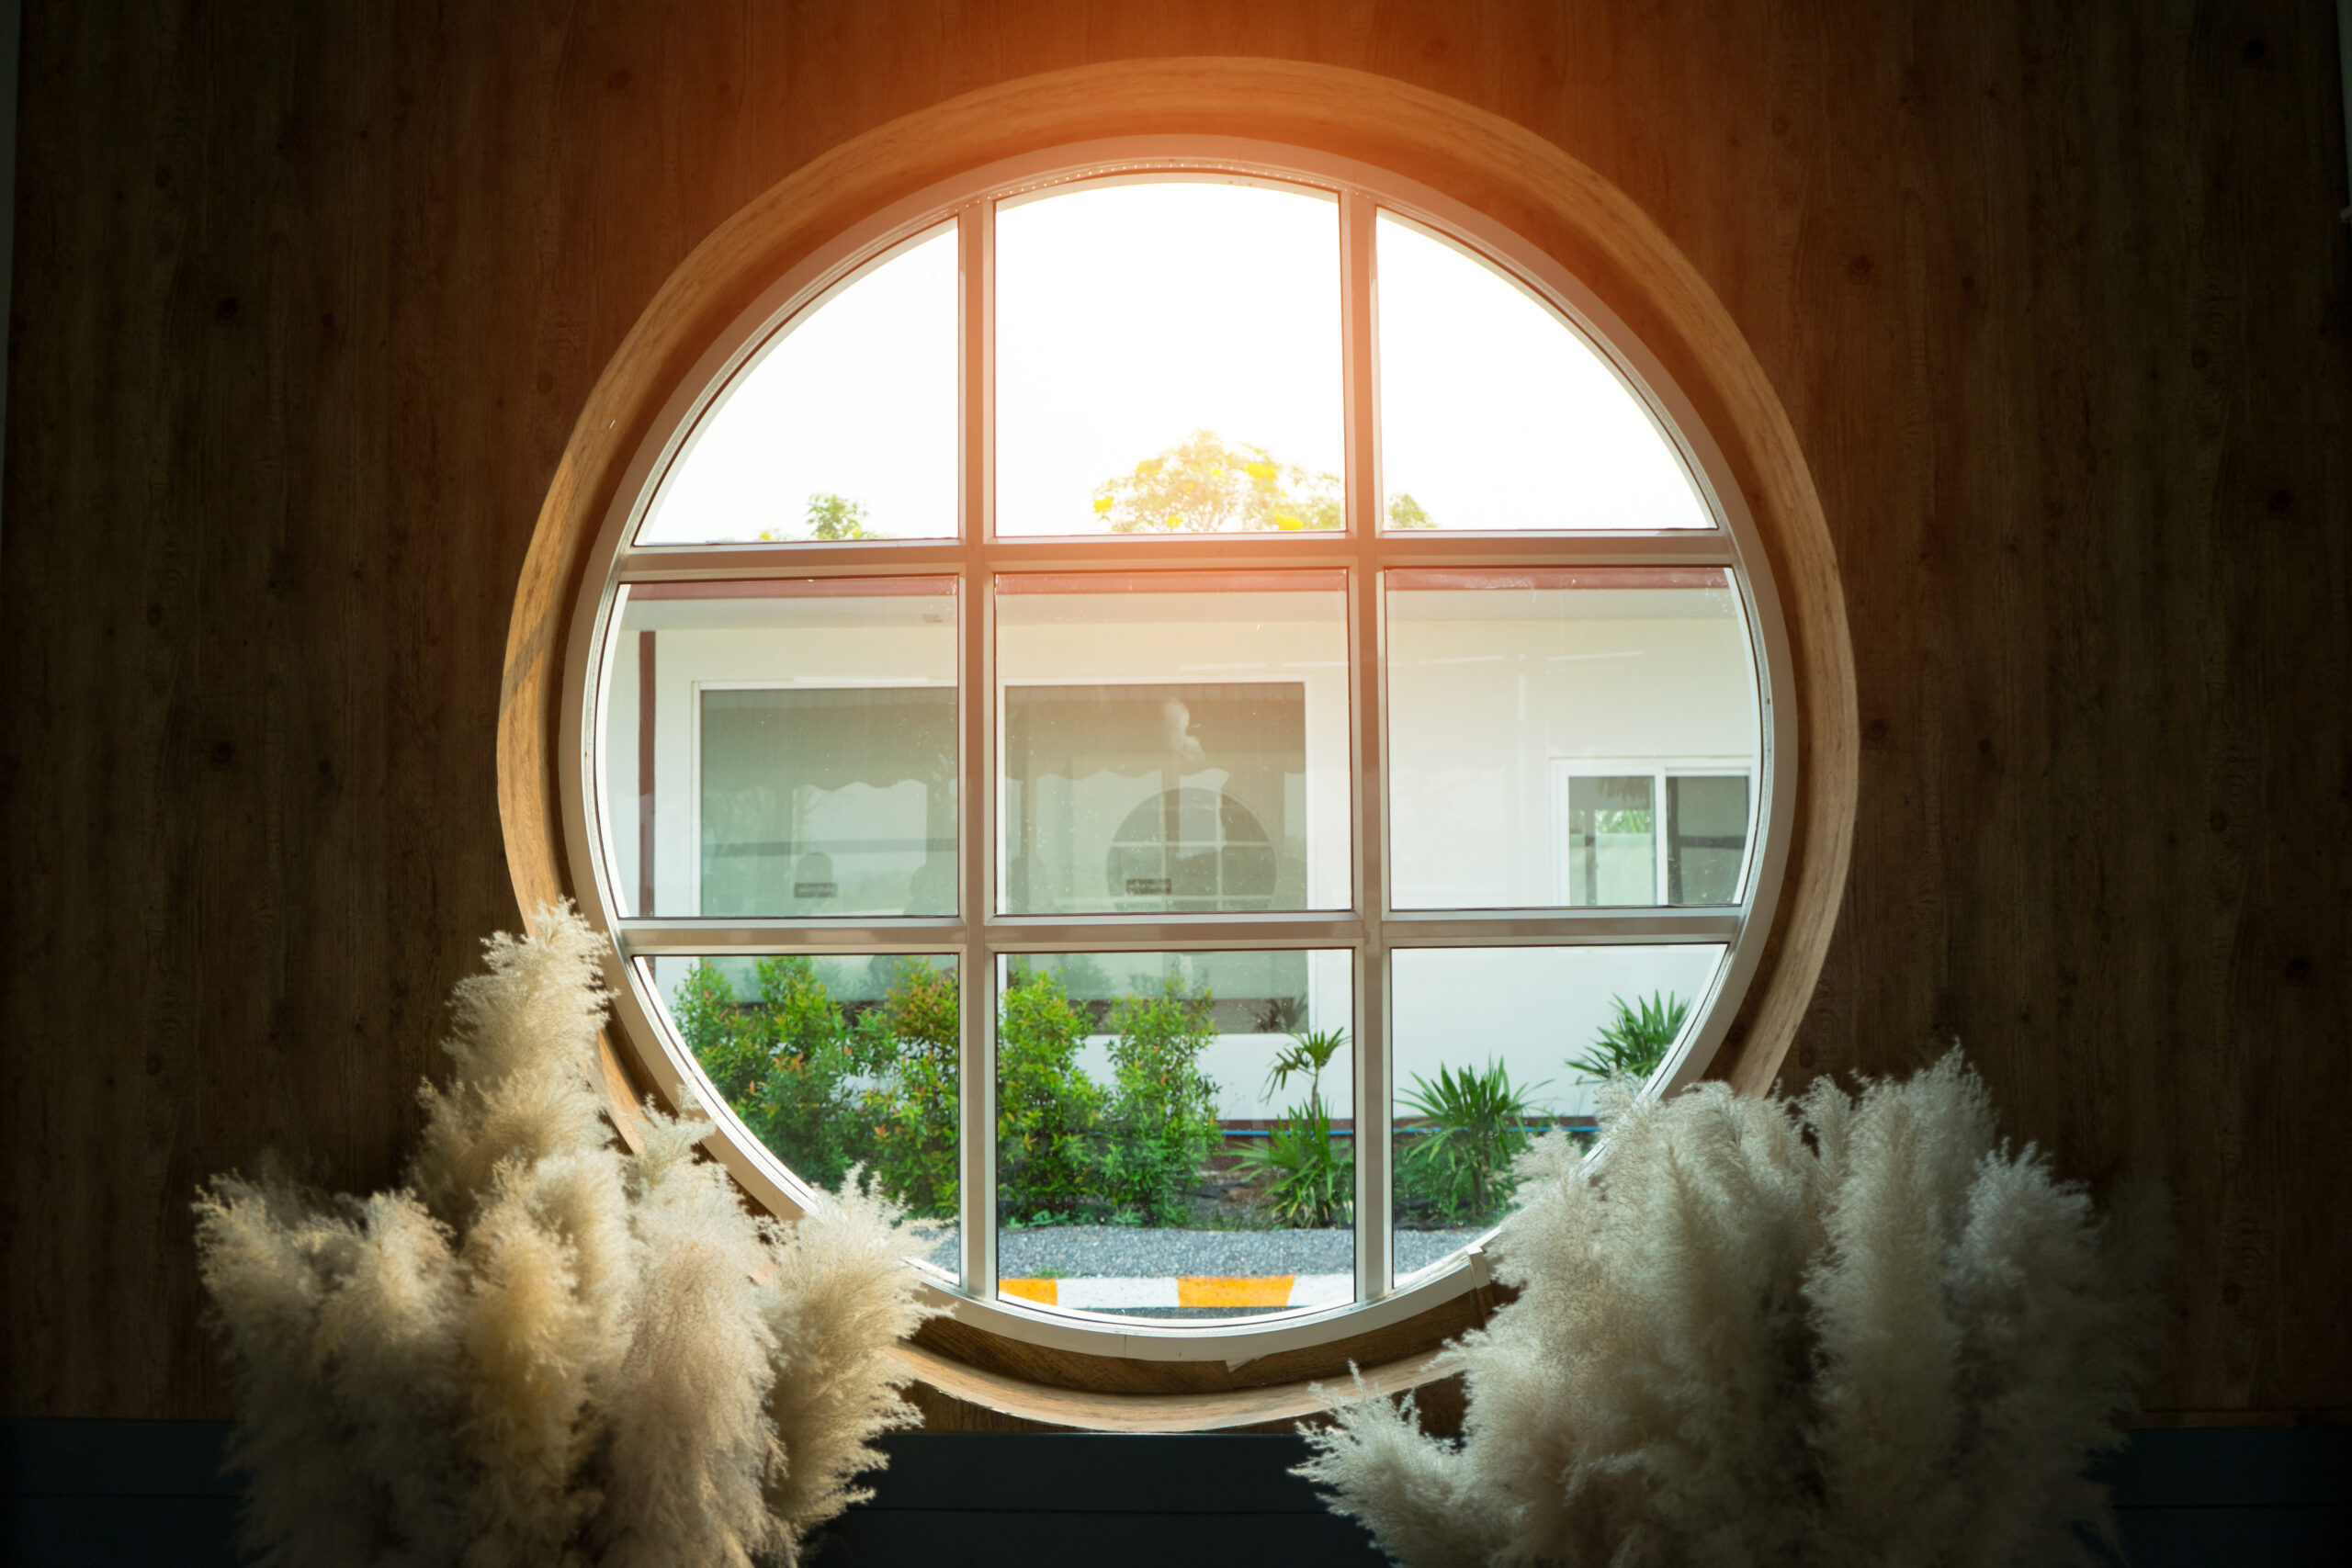 The glass circle window for to see view outside the house with white flower grass near it and sunlight to shine in.